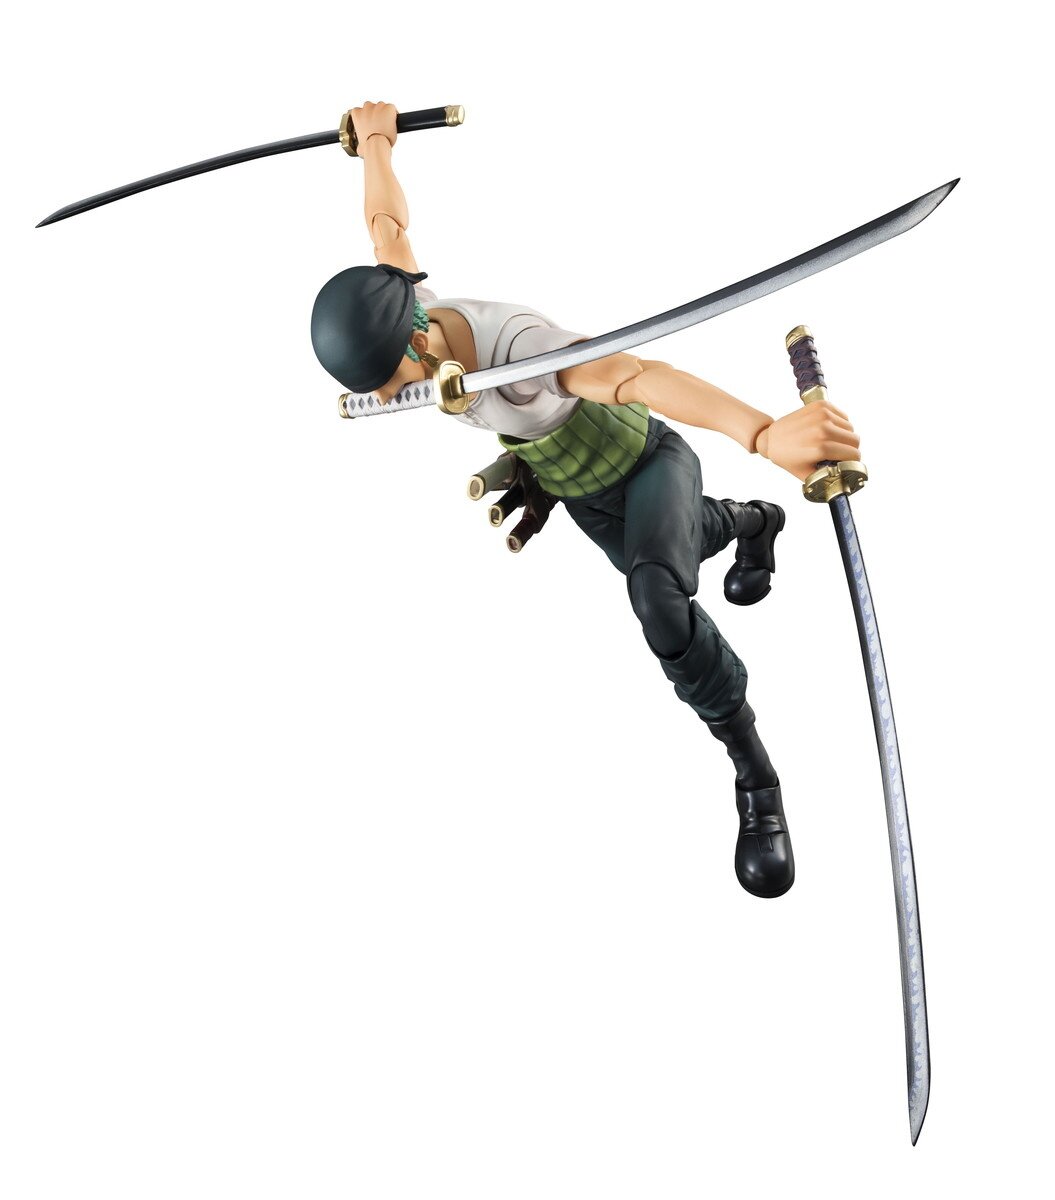 Variable Action Heroes ONE PIECE Roronoa Zoro about 18cm PVC pai Japan  Import